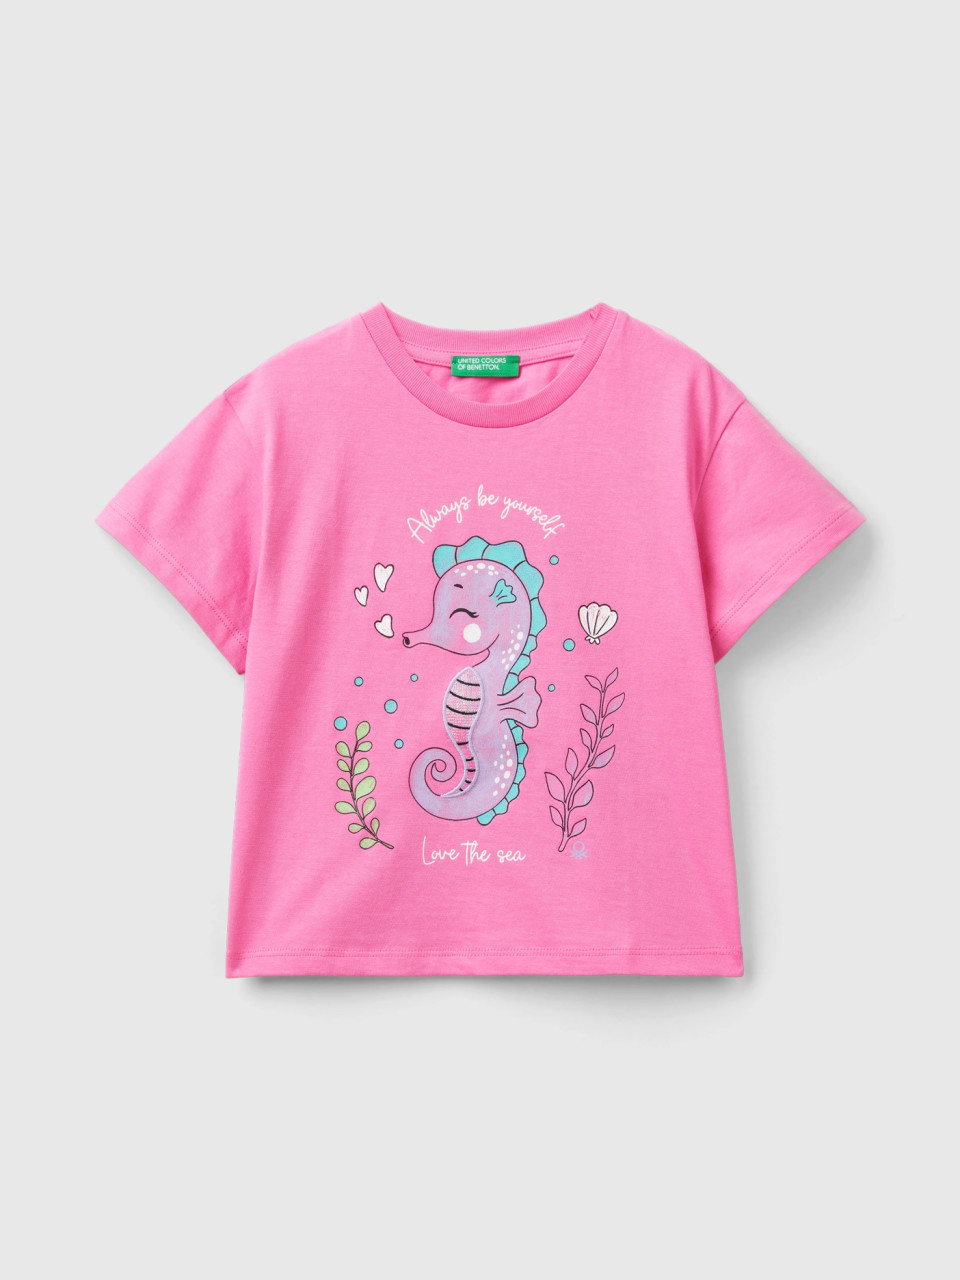 Benetton, T-shirt With Print And Patches, Pink, Kids